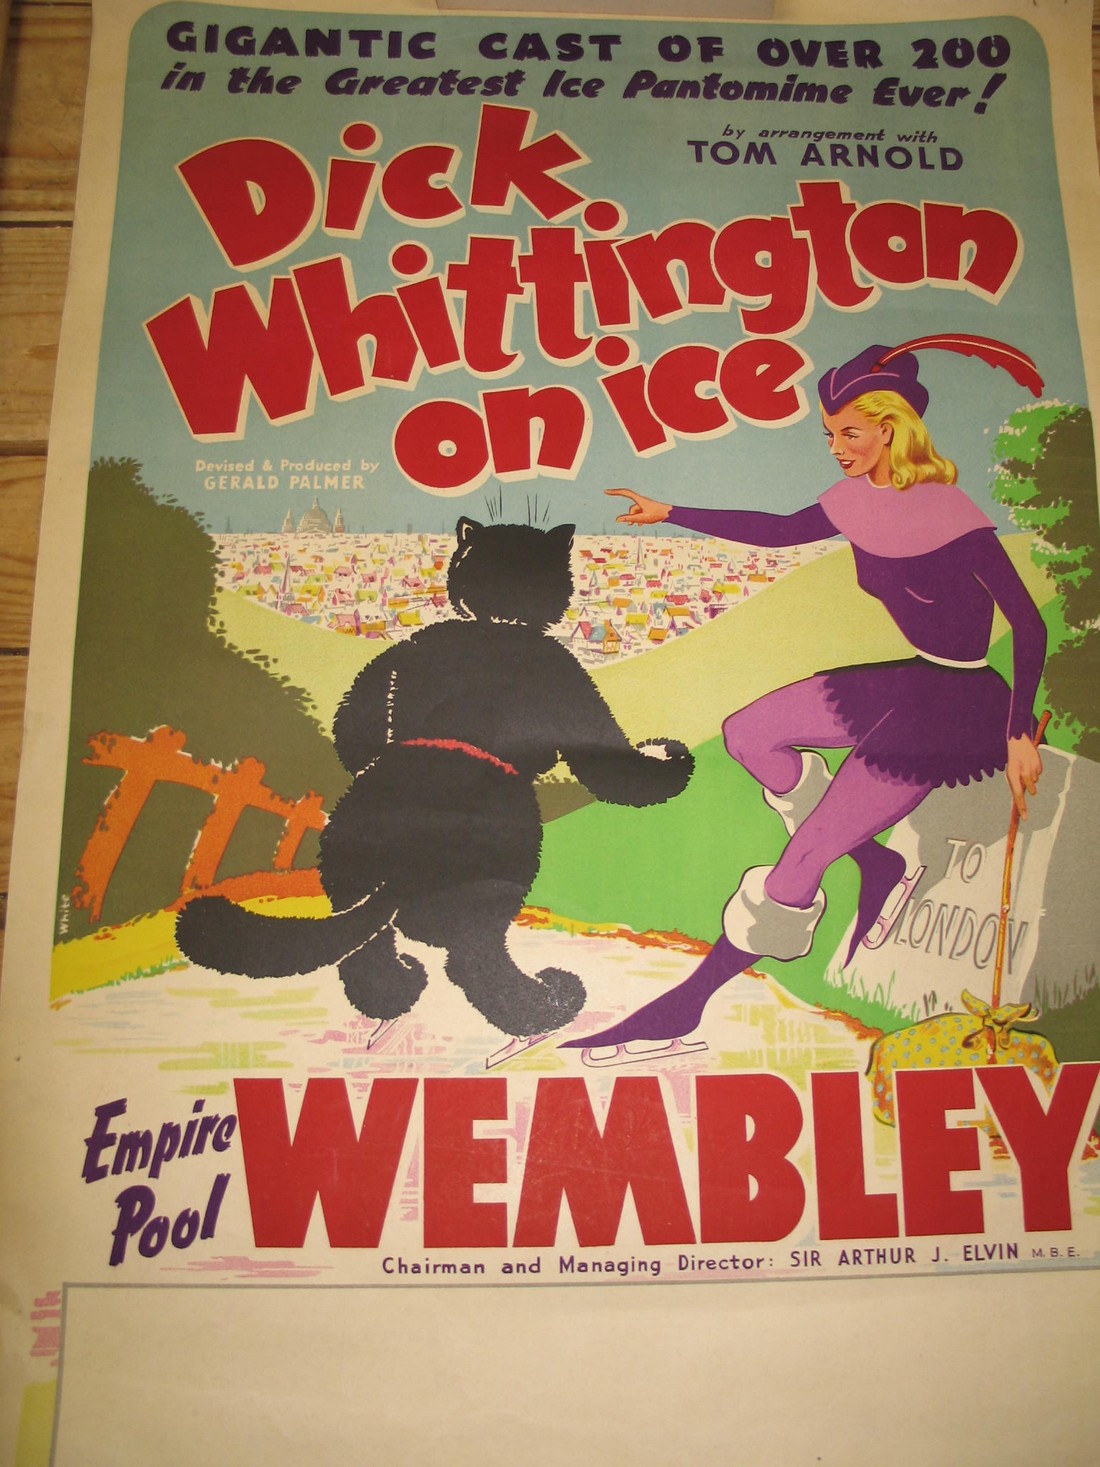 POSTER, col. litho. Poster for Dick Whittington on Ice